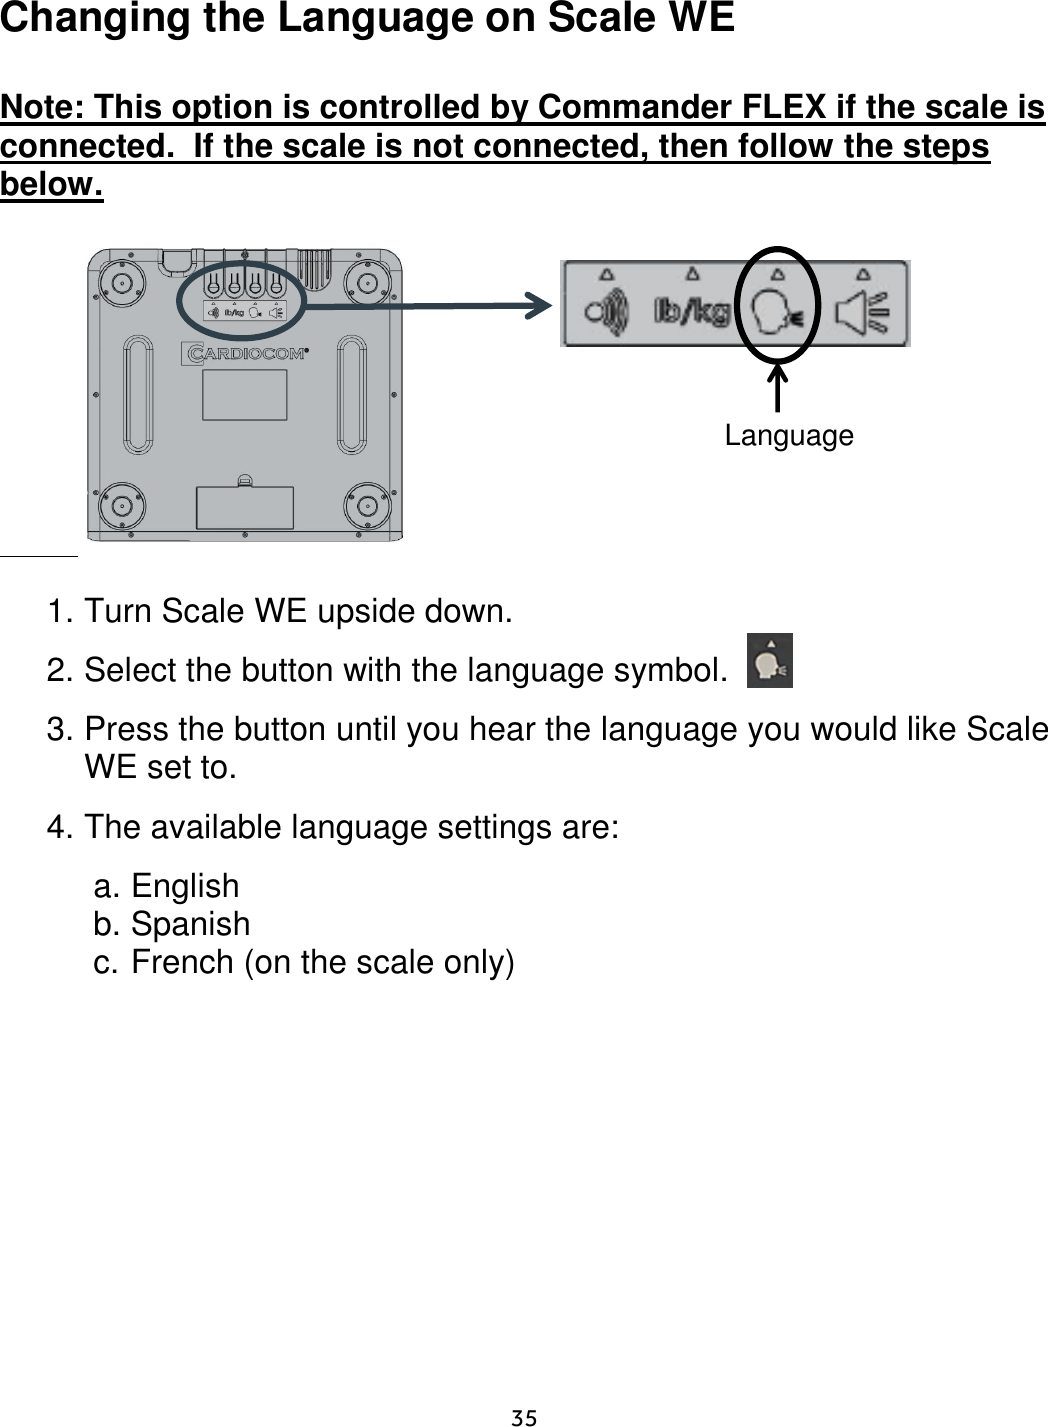     35  Changing the Language on Scale WE  Note: This option is controlled by Commander FLEX if the scale is connected.  If the scale is not connected, then follow the steps below.                   1. Turn Scale WE upside down.    2. Select the button with the language symbol. 3. Press the button until you hear the language you would like Scale WE set to. 4. The available language settings are:  a. English b. Spanish c. French (on the scale only)        Language 